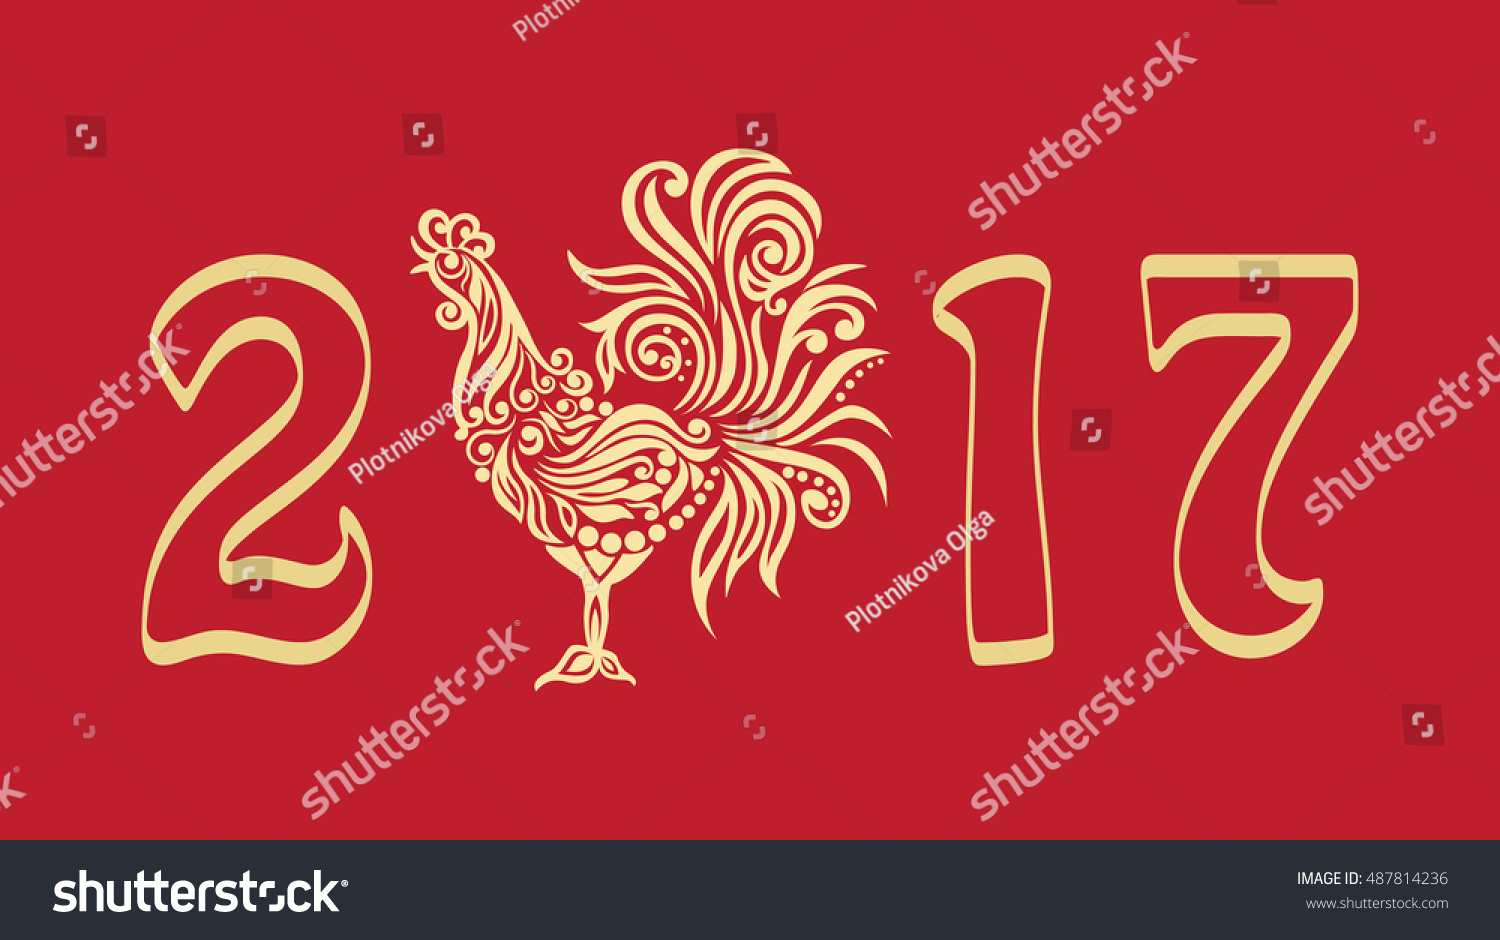 SVG of Vector illustration for 2017 year with fairy rooster - chinese symbol of new year.Image of 2017 year of Red Rooster.Vector element for New Year. svg